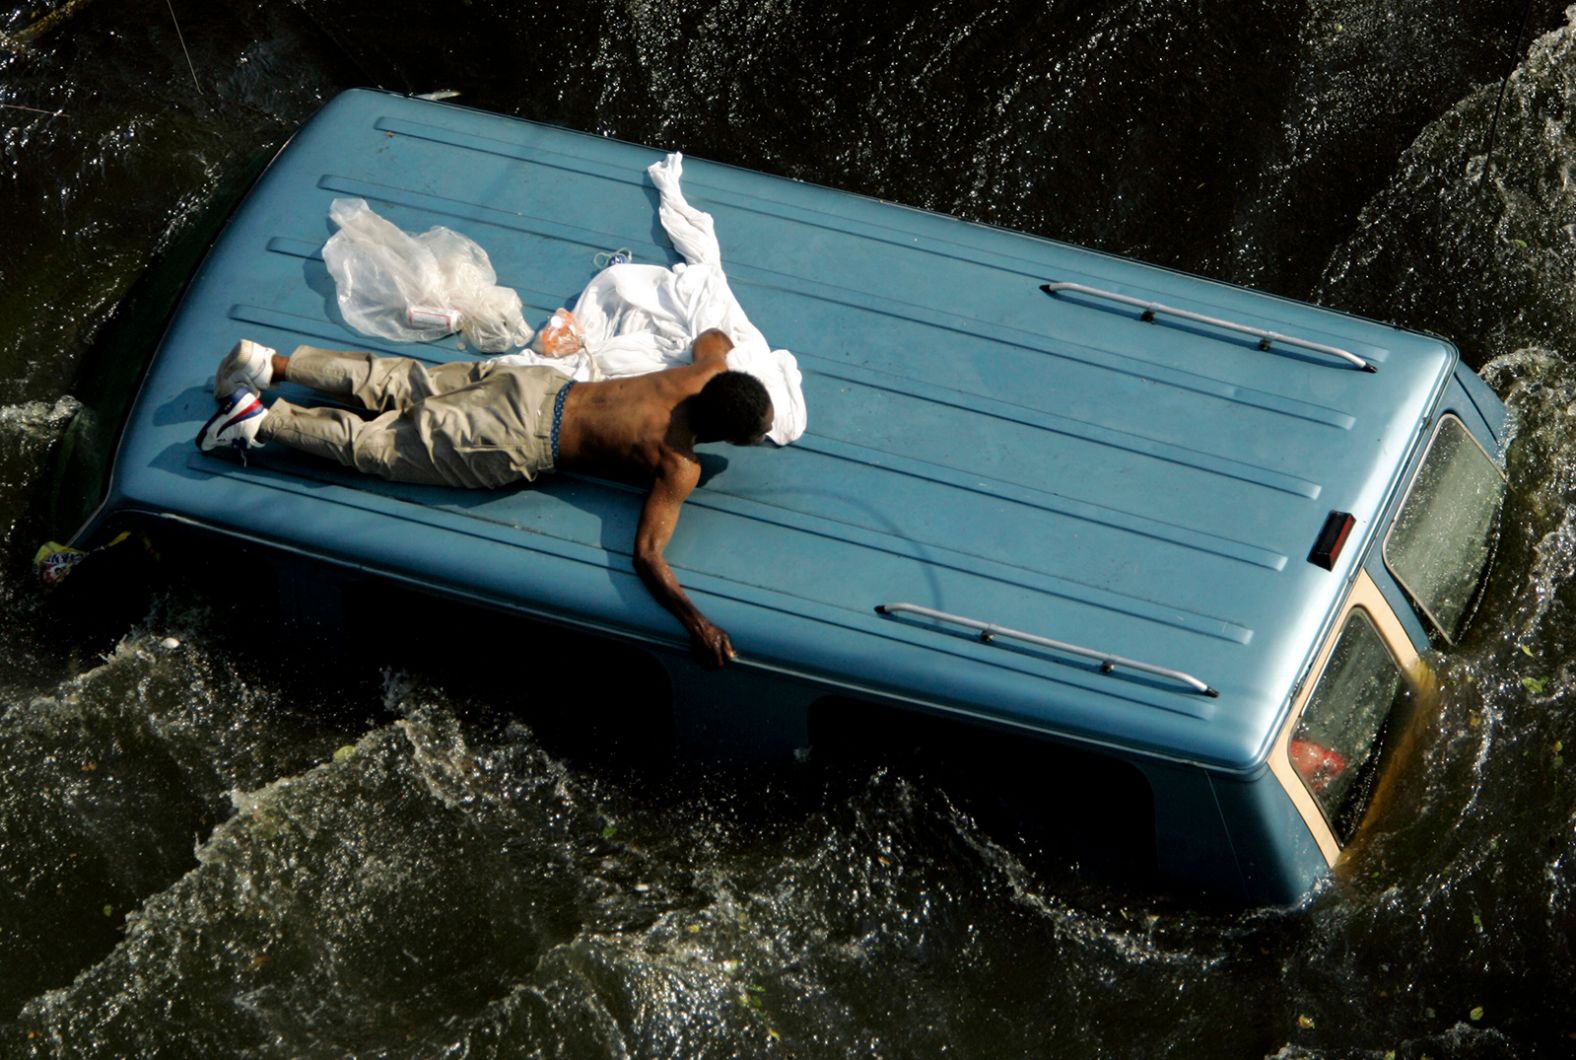 A man clings to the top of a vehicle in New Orleans before being rescued by the Coast Guard.